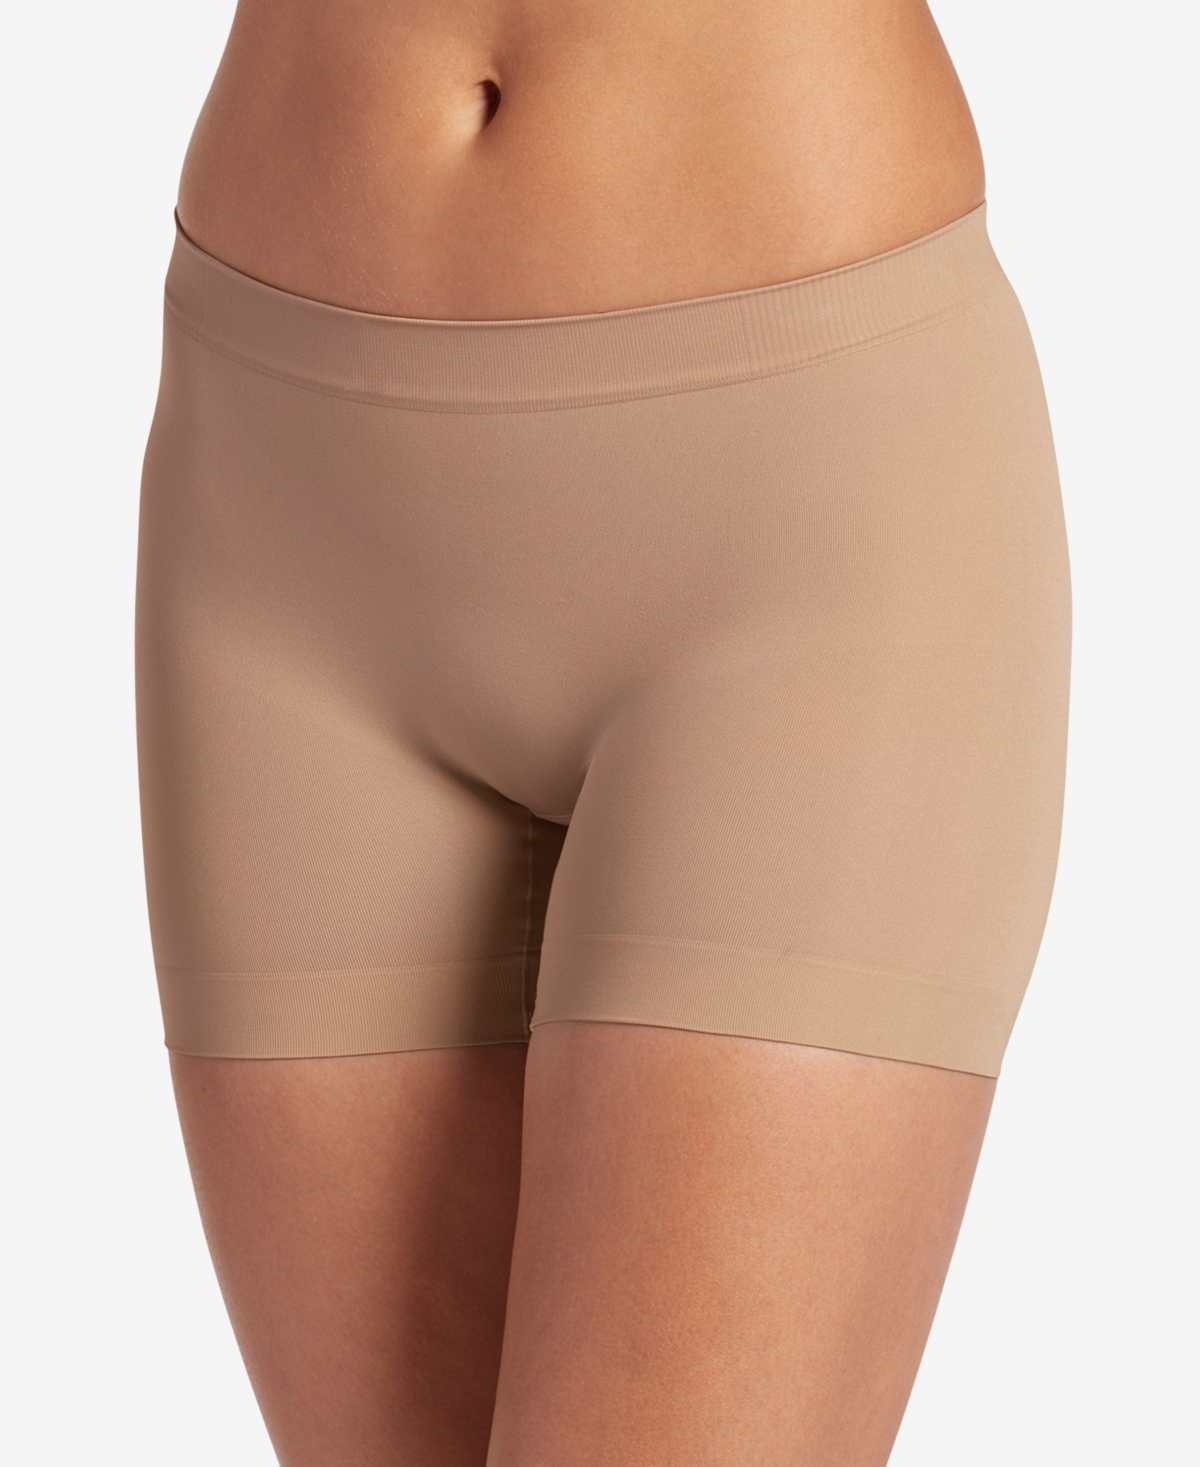 Skimmies No-Chafe Short Length Slip Short, available in extended sizes 2108 - Light (Nude )